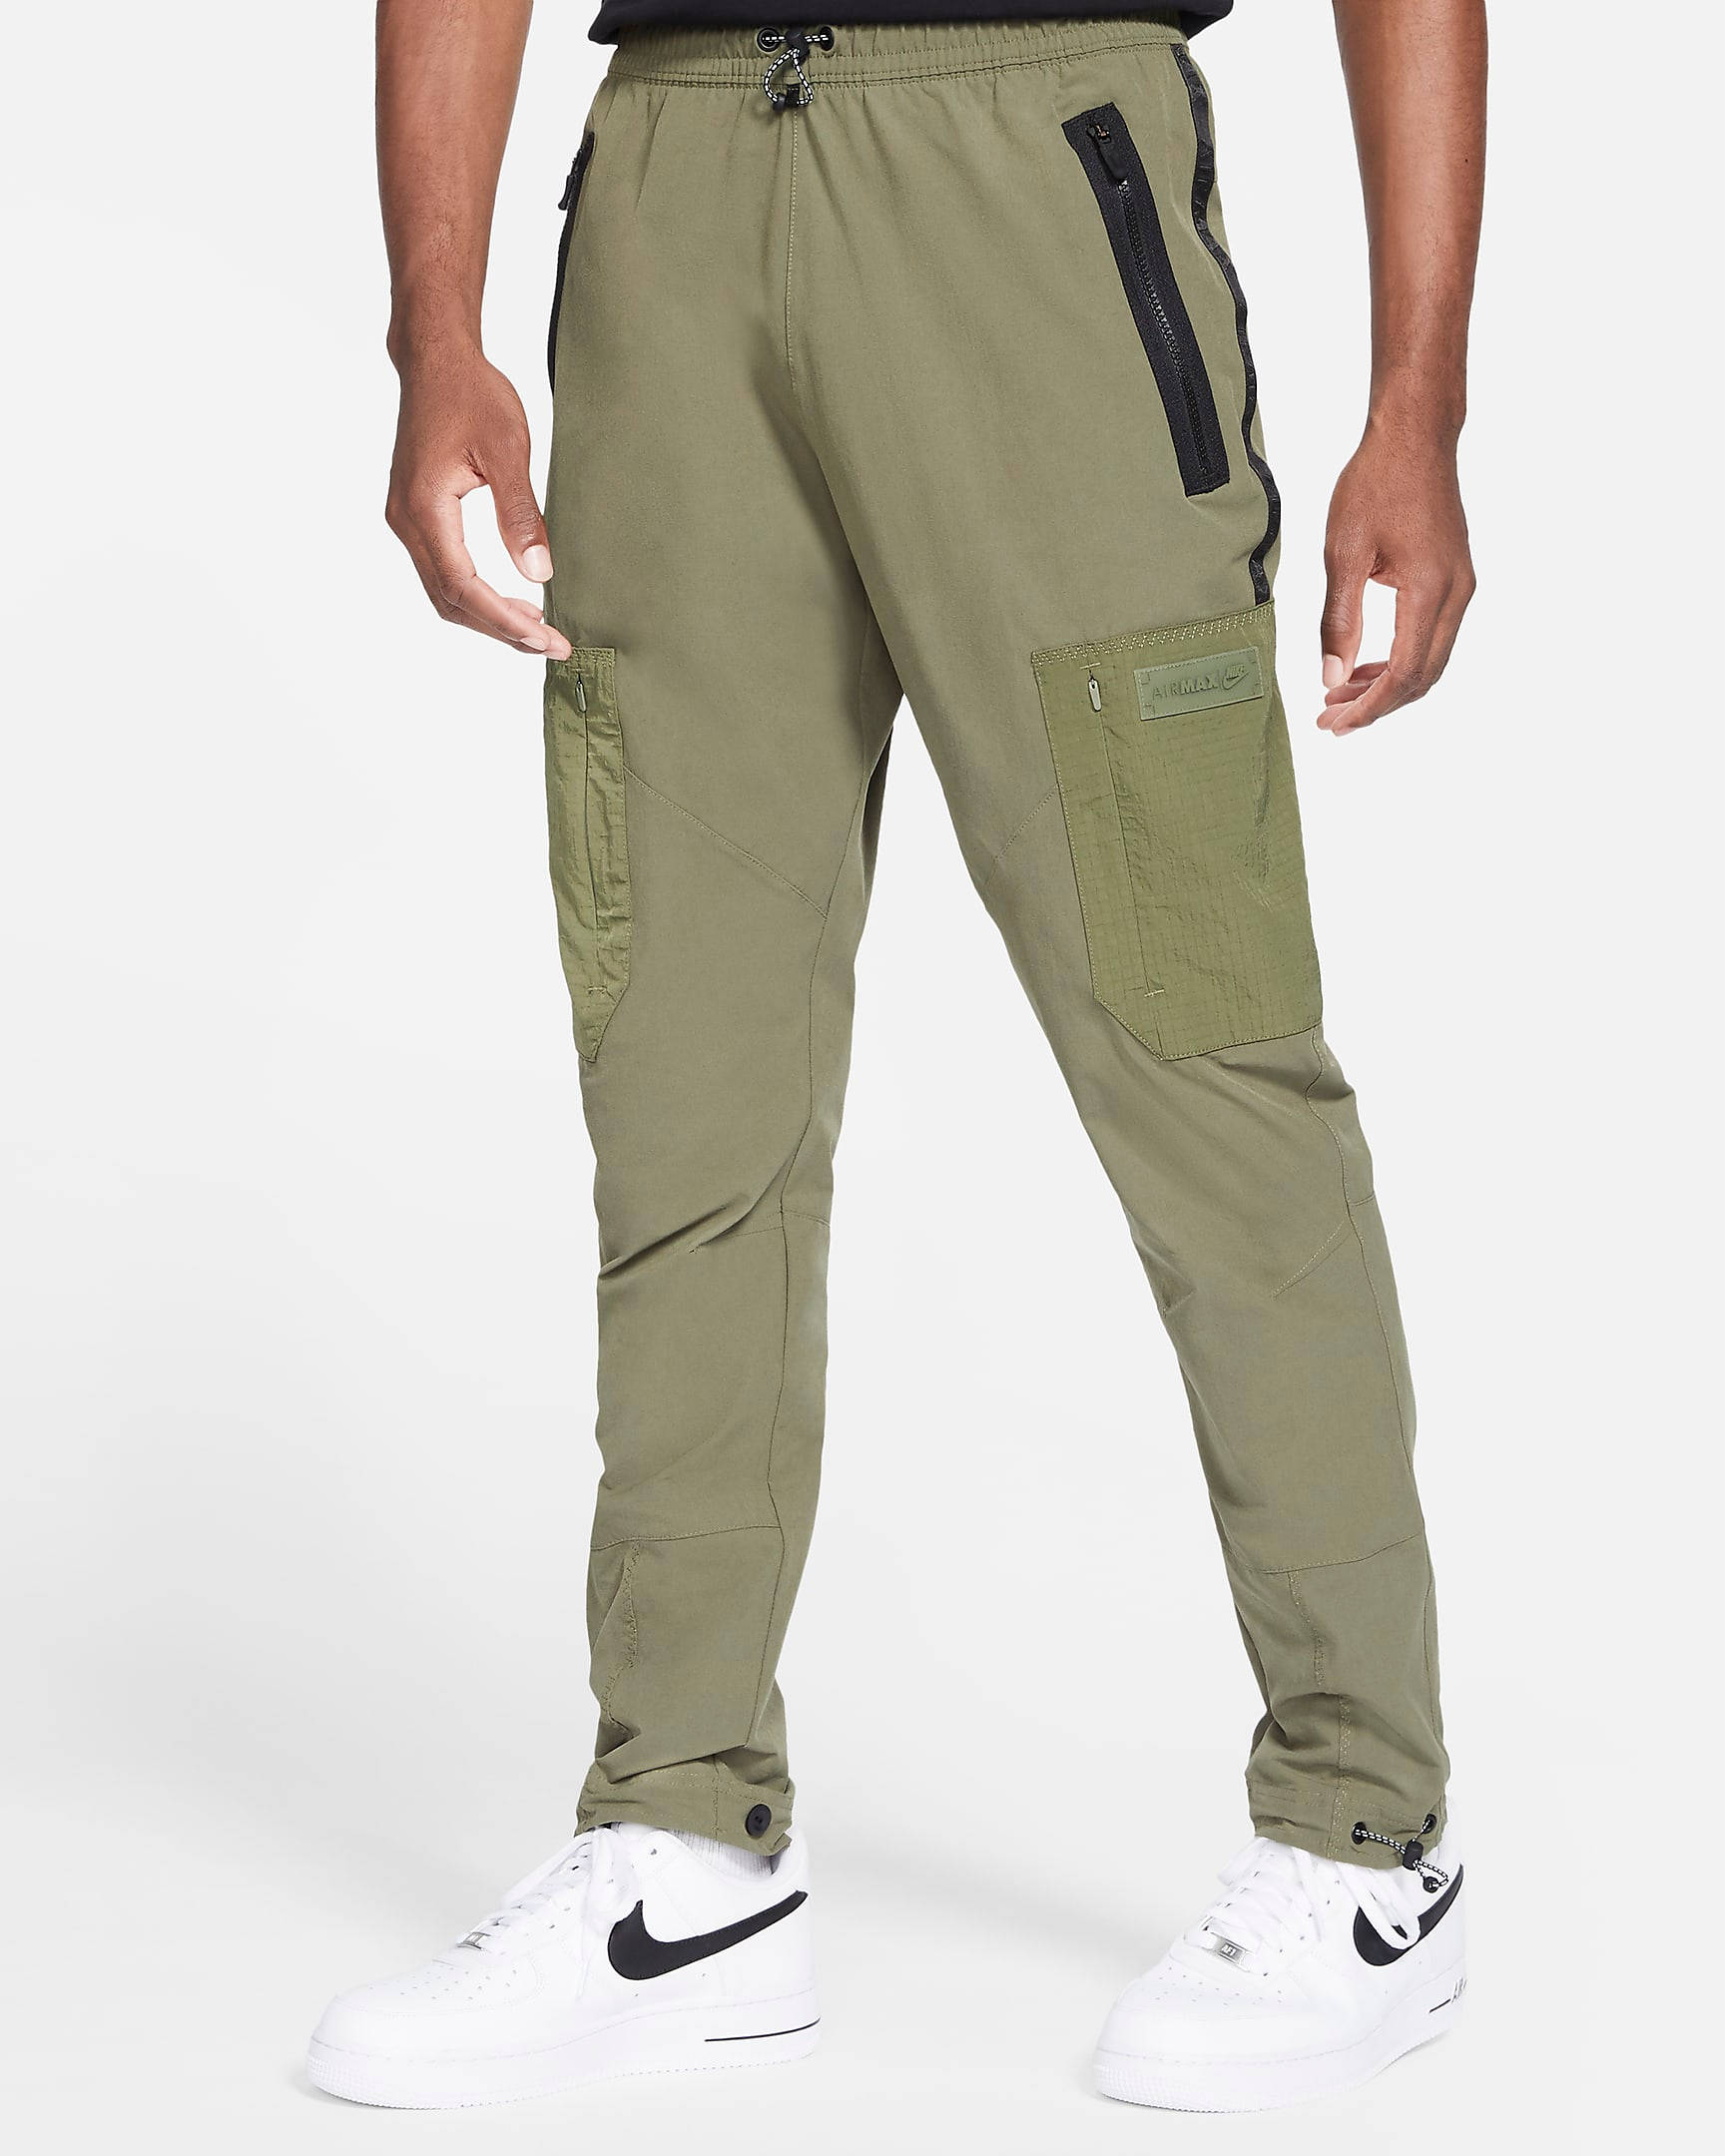 Nike Sportswear Air Max Woven Cargo Trousers - Medium Olive | The Sole ...